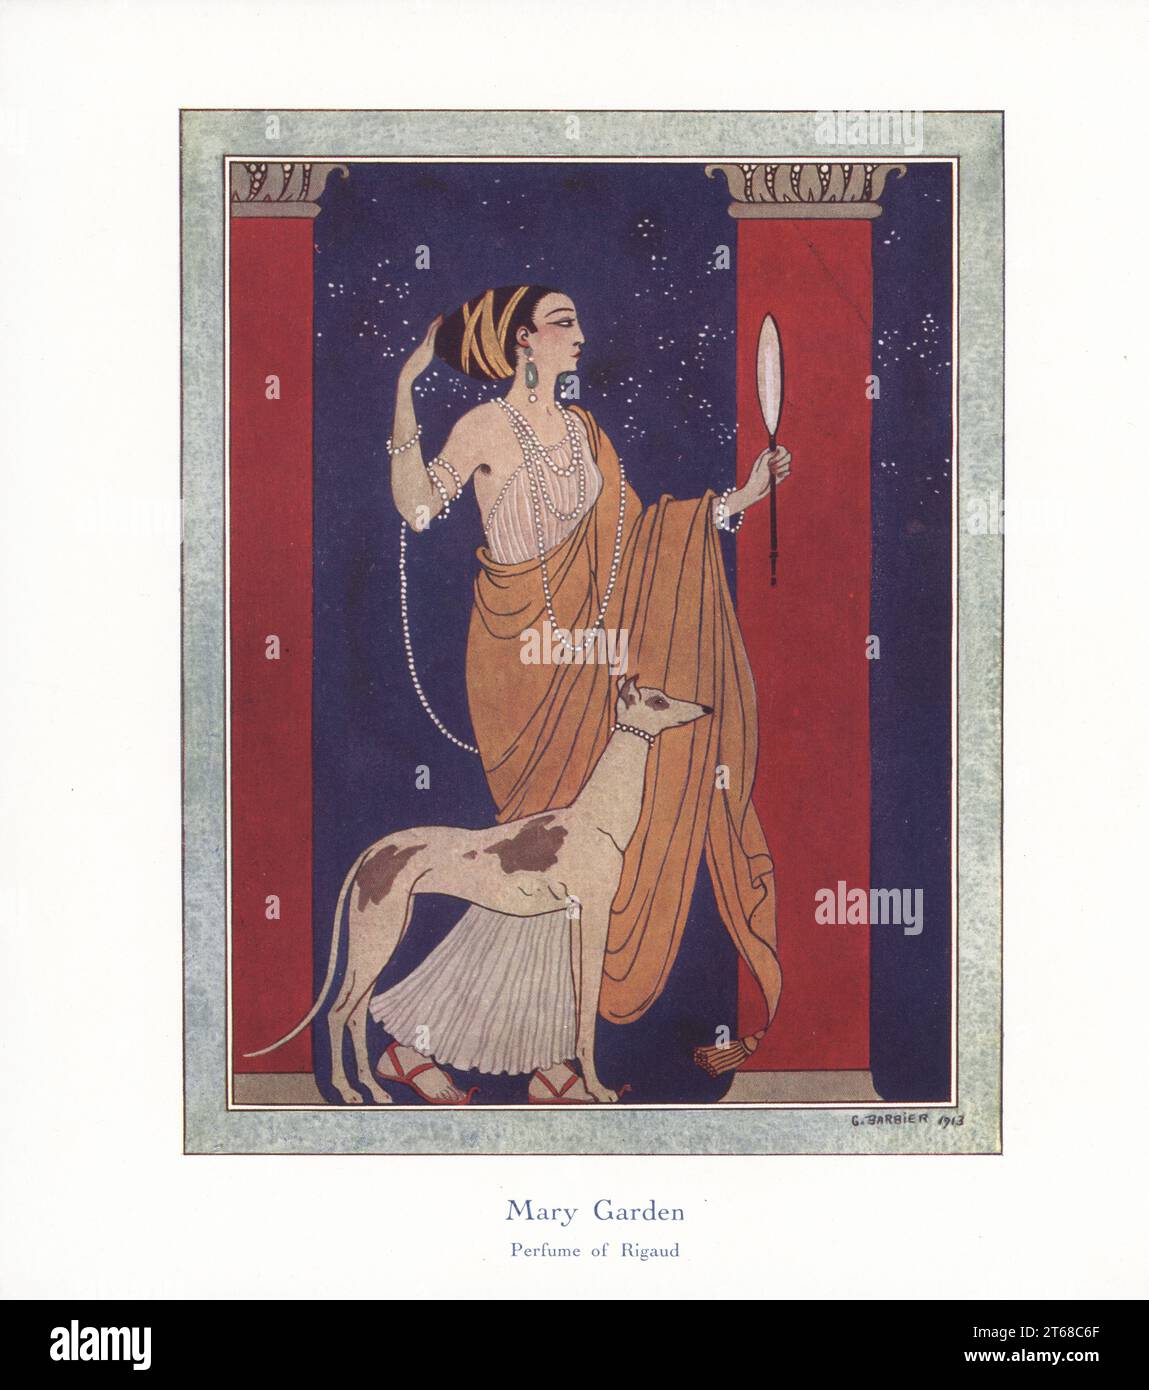 Promotional art for Mary Garden, Perfume of Rigaud, 1913. It was launched in 1910 and later discontinued. Named for the popular Scottish-American operatic lyric singer, 1874-1967. A woman in ancient Greek hairstyle and costume with strings of pearls looks in a mirror between two columns. Colour-printed illustration by George Barbier from Andre de Fouquieres The Perfumes of Rigaud, Letters of a Parisian and and American Girl, L'art des parfums, Lettres d'un Parisien et d'une Américaine, Maison Rigaud, Parfumeur, Paris, 1915. Stock Photo